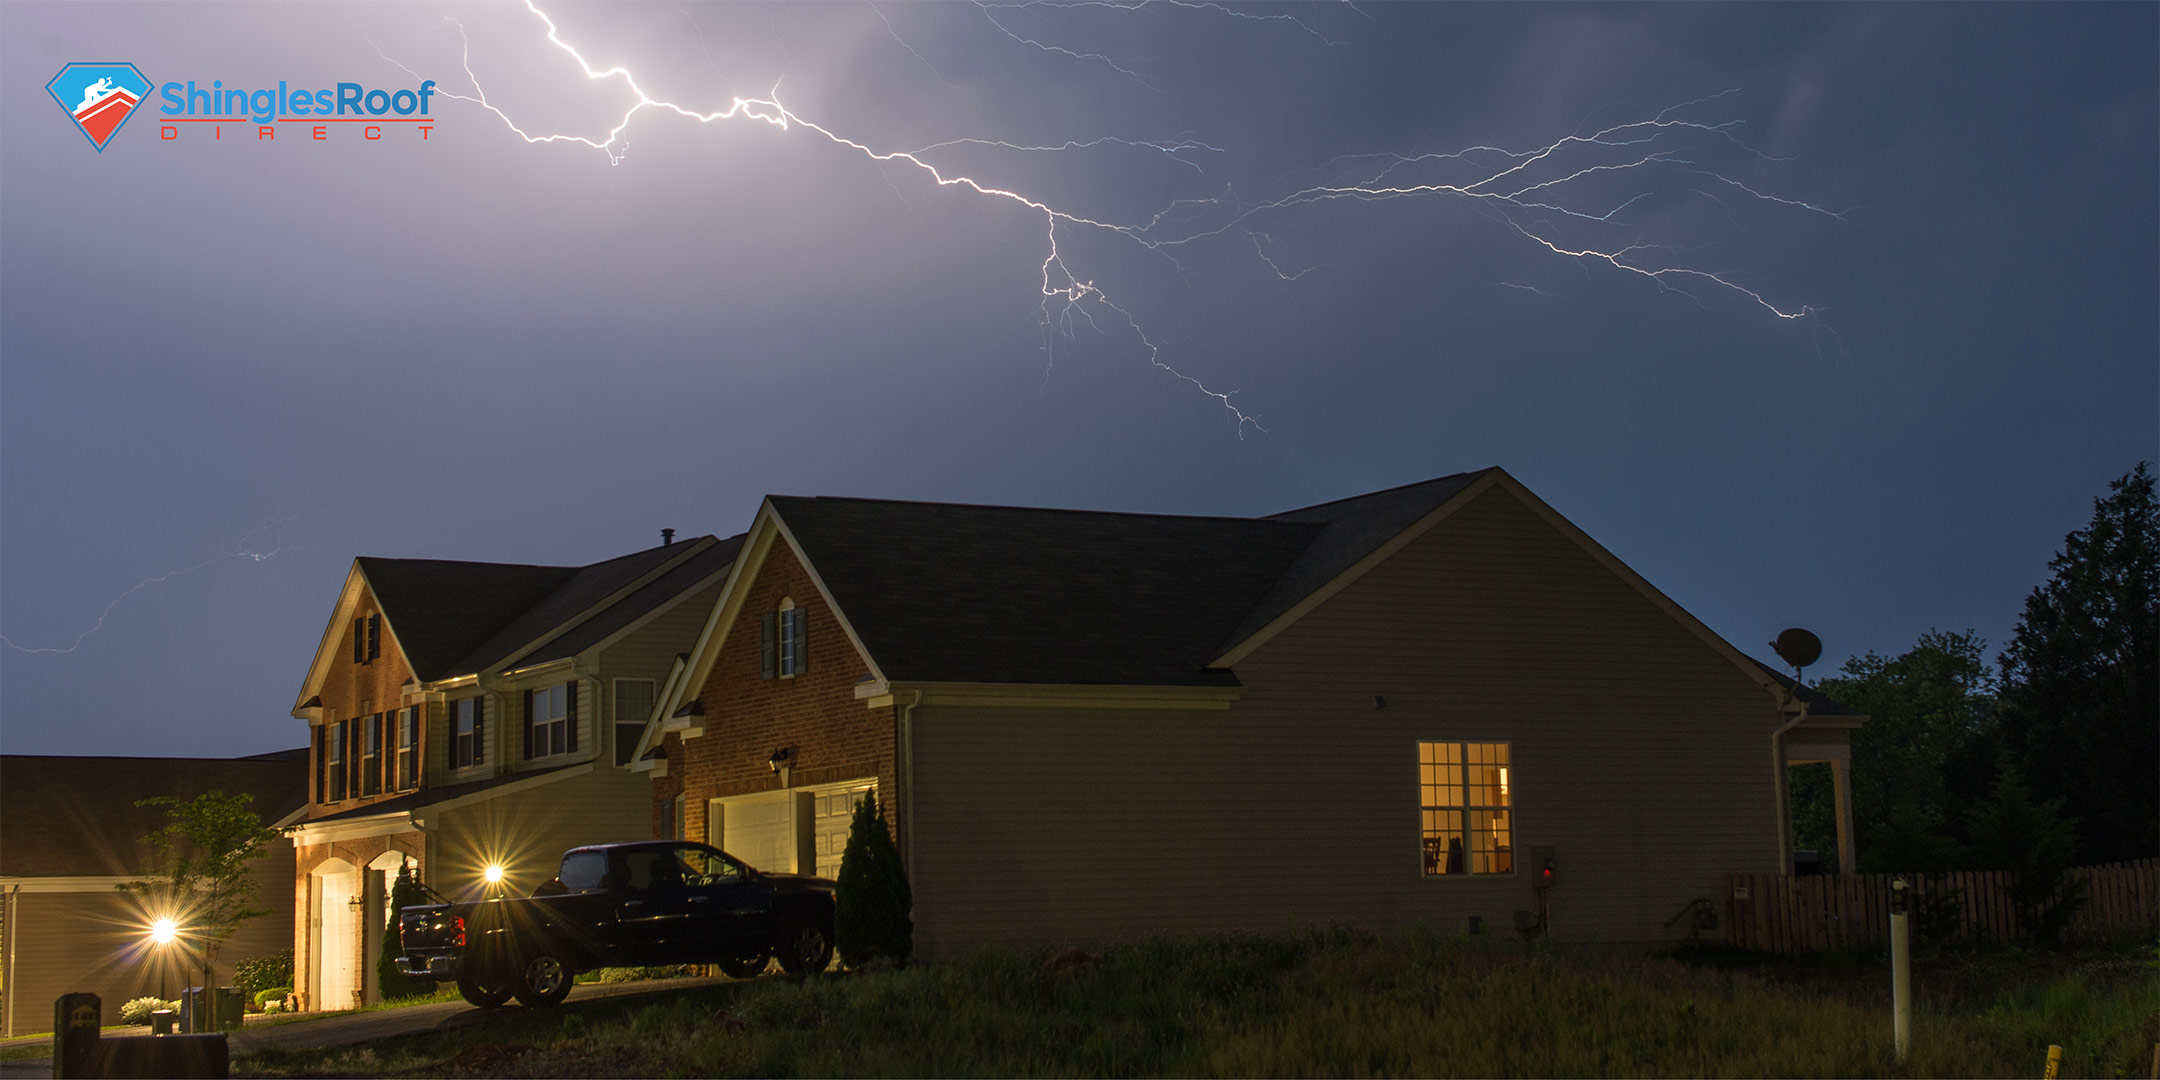 ROOFING DO’S AND DON’TS AFTER A SEVERE STORM